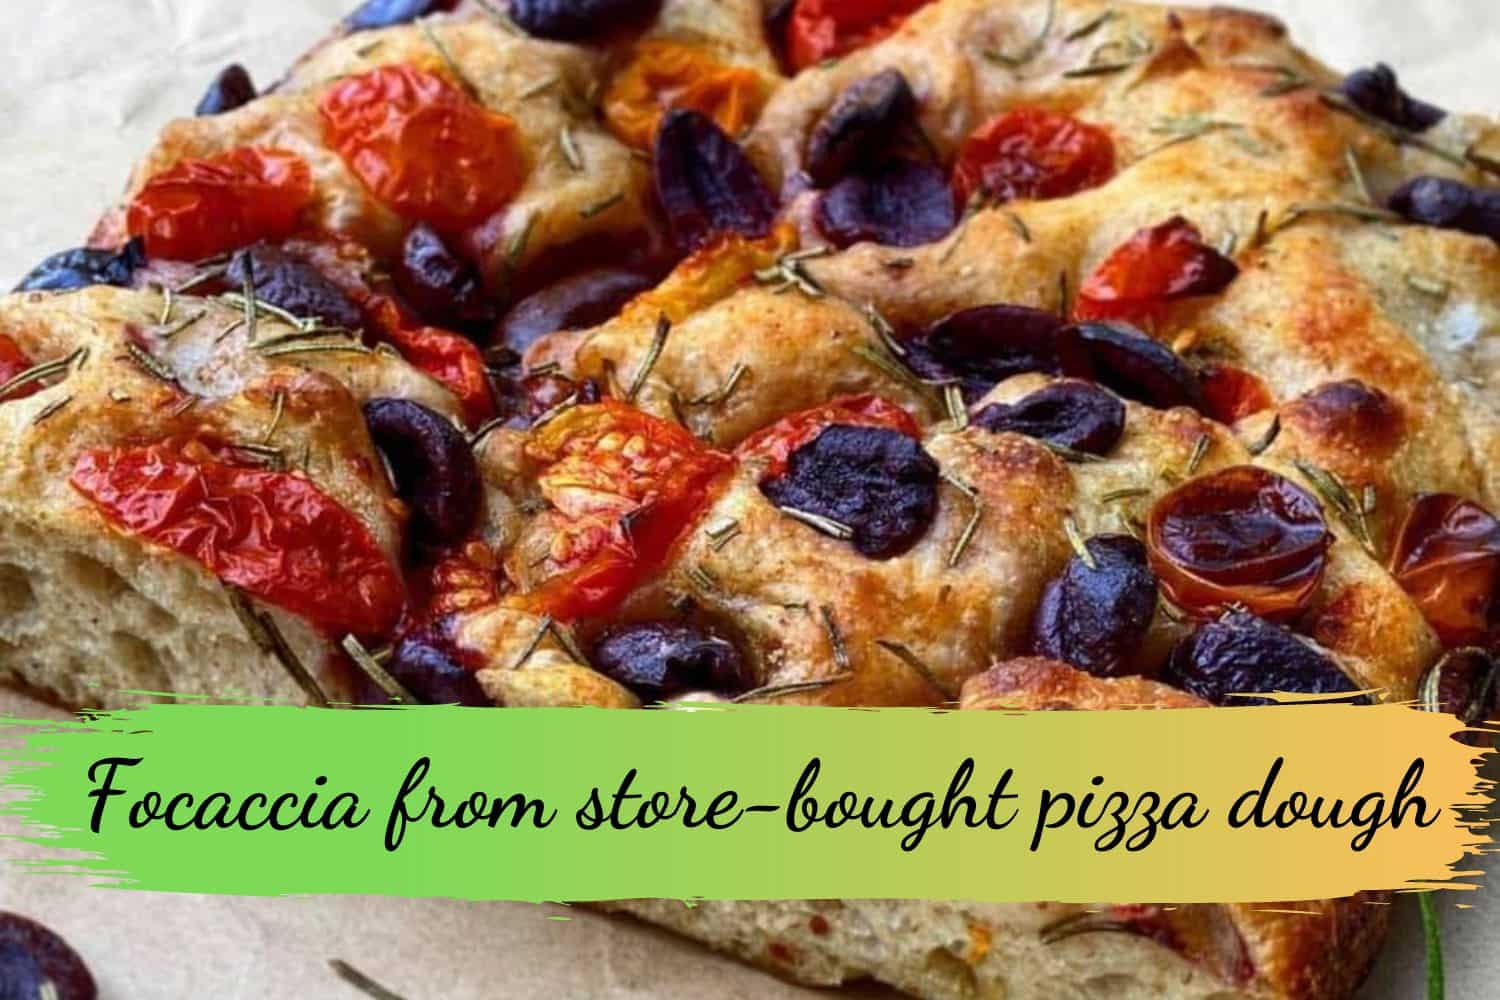 Focaccia from store-bought pizza dough